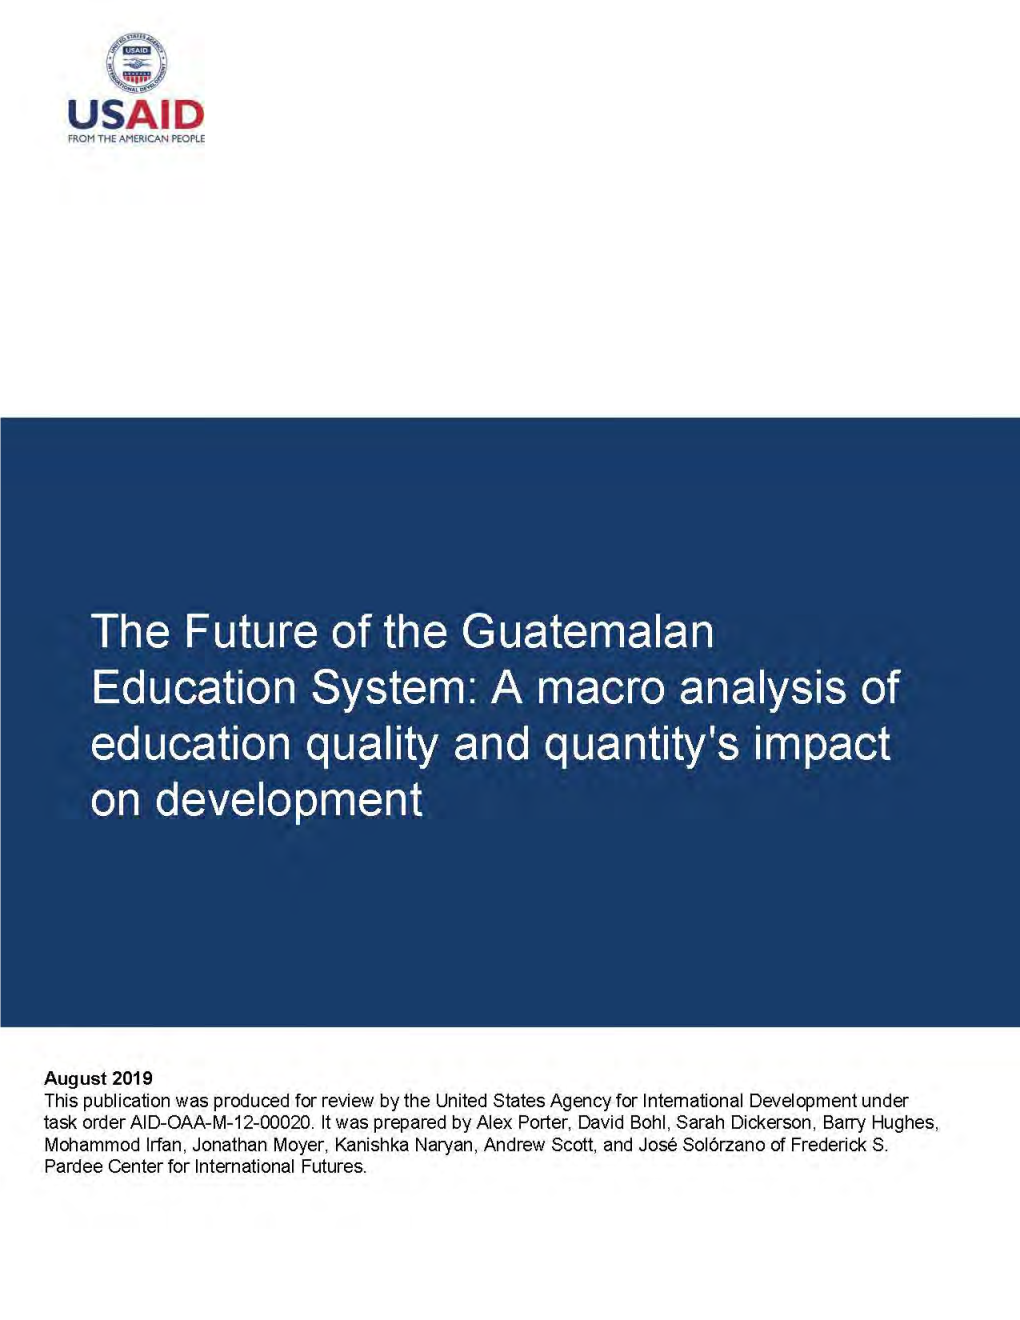 The Future of Guatemalan Education System